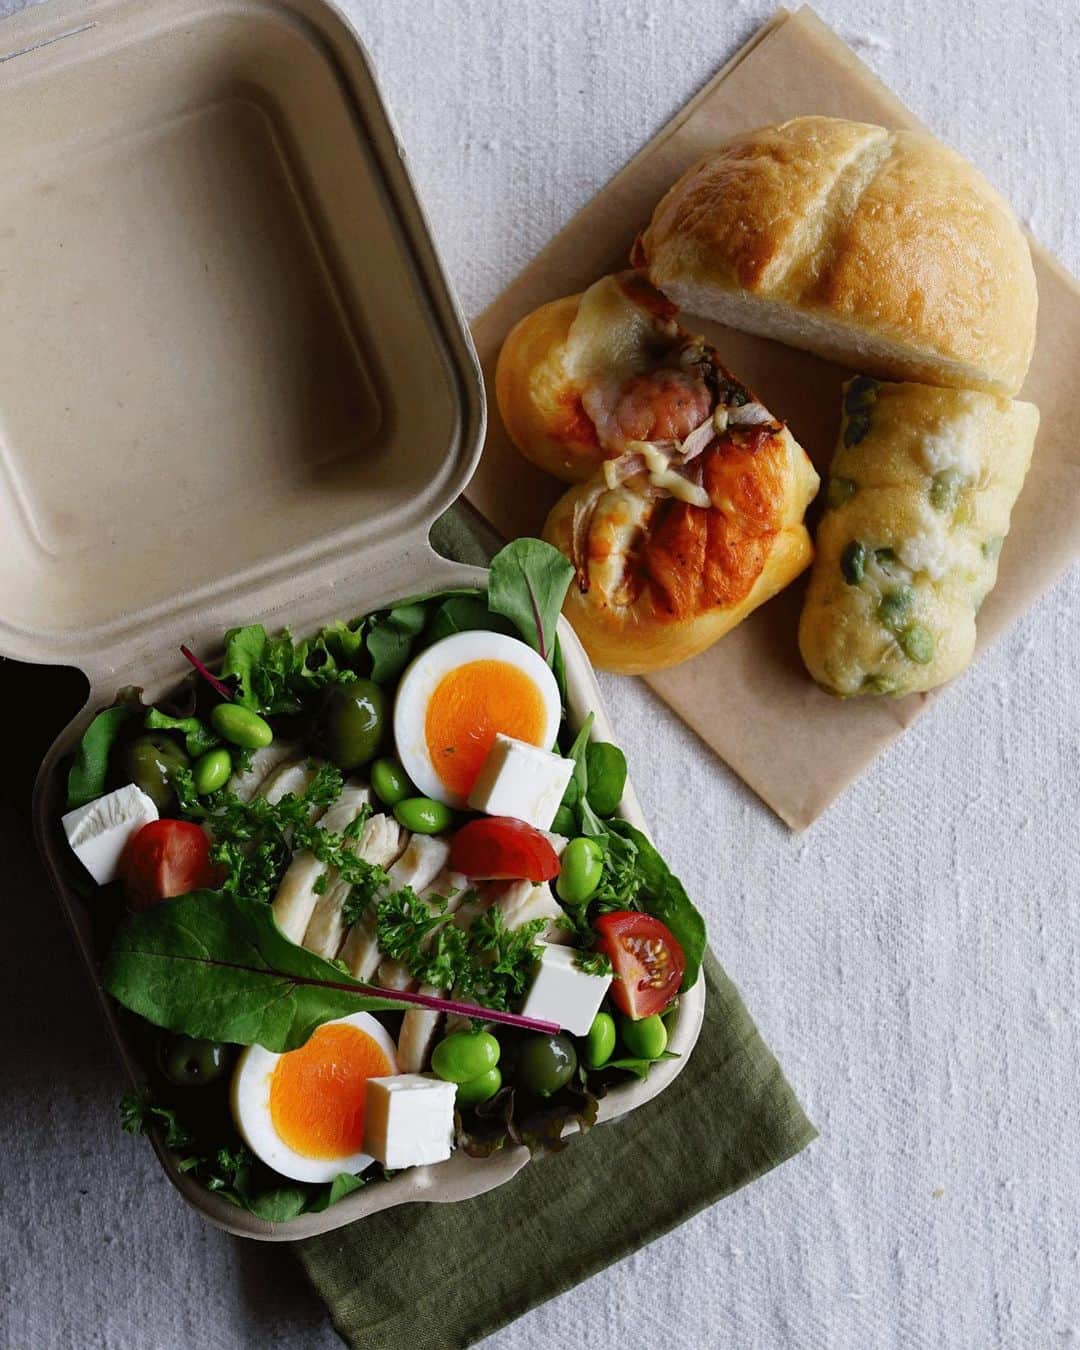 Ryoko Yunokiのインスタグラム：「+ + + Bread and salad bento/パンとサラダのお弁当 . *some bread *Green salad, topped with boiled chicken, baby tomatoes, kiri cheese, hard-boiled egg, edamame and green olives, seasoned with salt/pepper and drizzled olive oil . *パン *グリーンサラダ。茹で鶏、プチトマト、ゆで卵、枝豆、クリームチーズ、グリーンオリーブ。味付けは塩胡椒とオリーブオイル + + #bento #お弁当 #丸の内弁当 #f52grams #紙パック弁当」